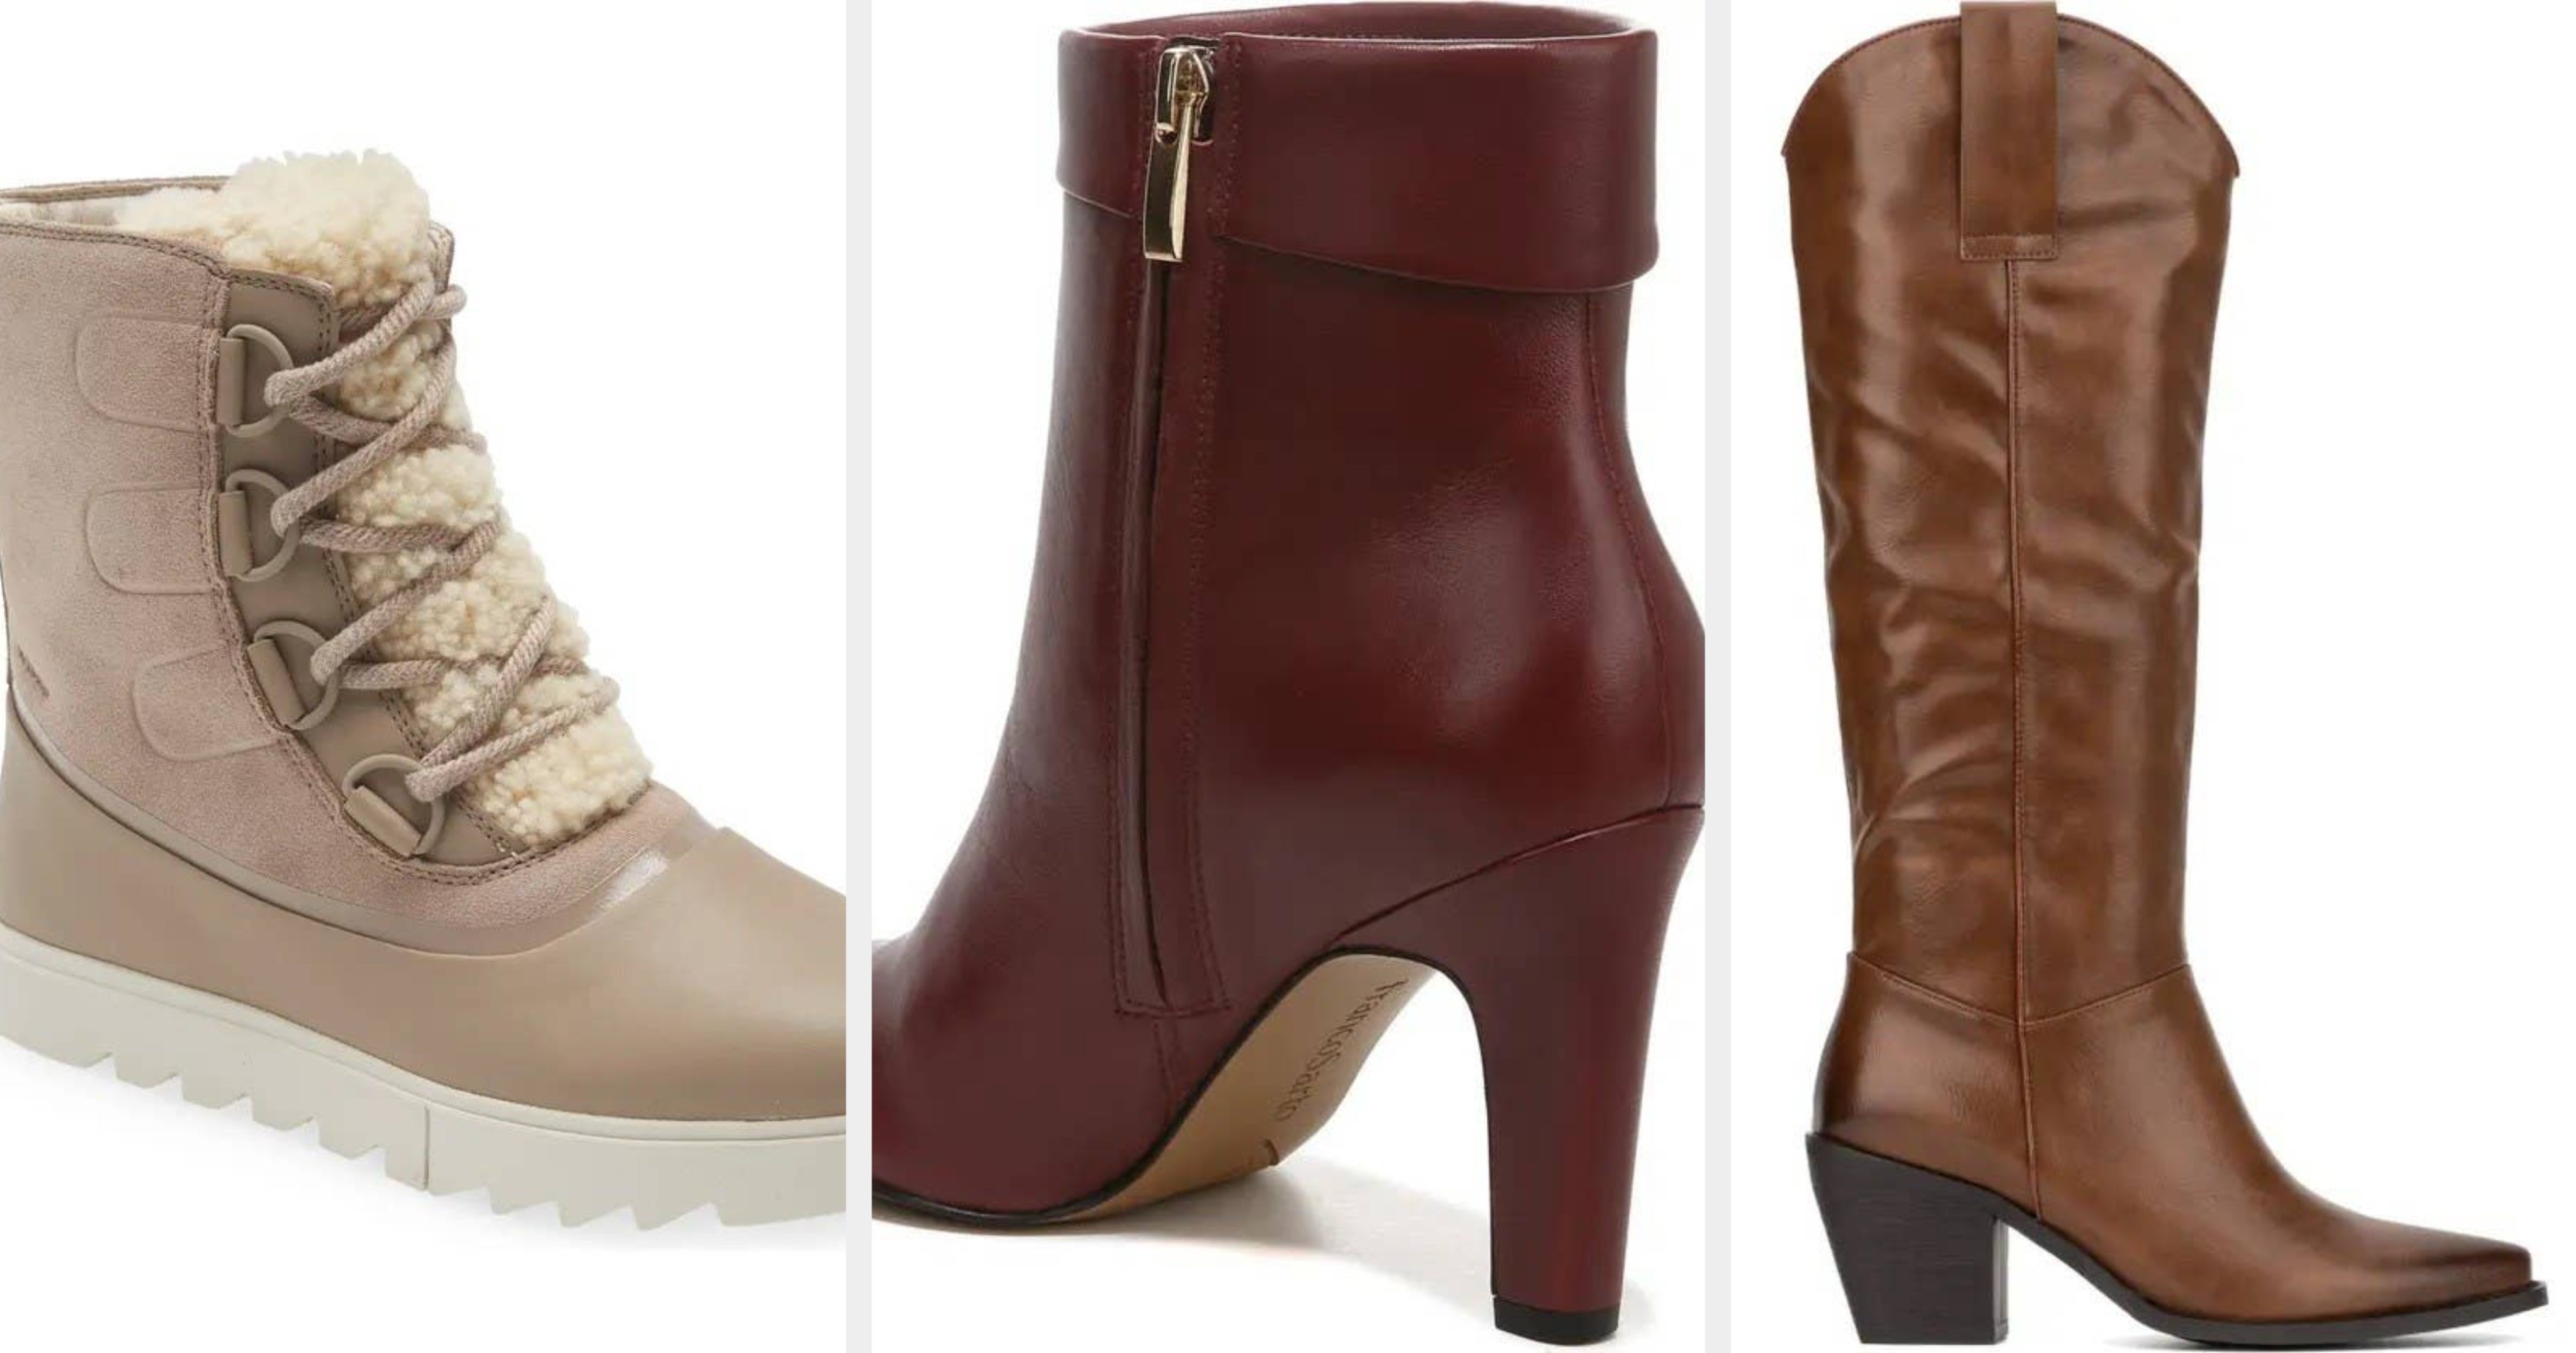 Sam Edelman Sale: Save big on boots and shoes at Nordstrom Rack